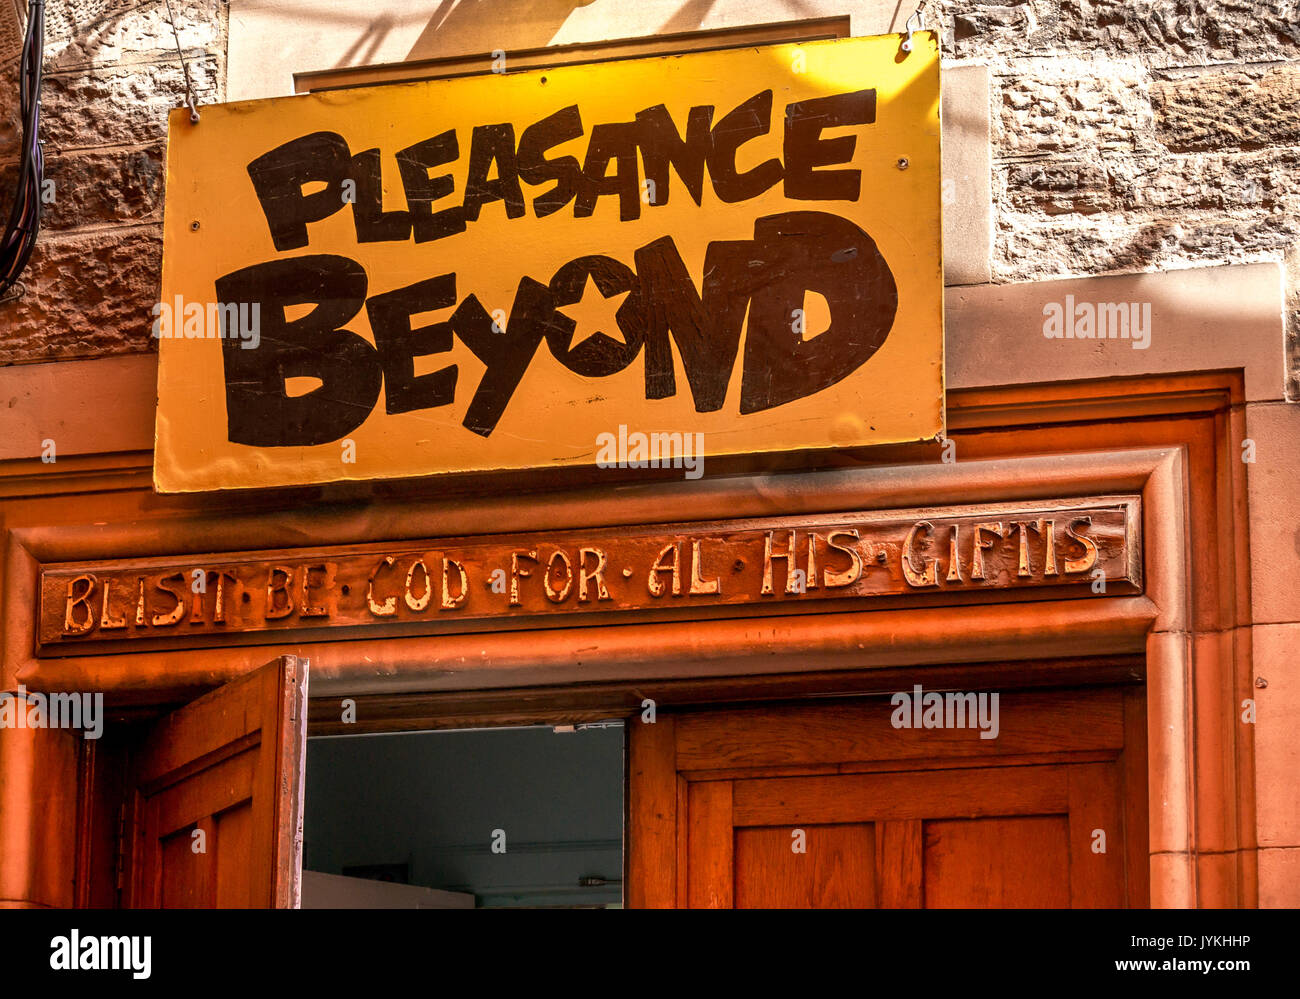 Juxtaposition of new Fringe Festival venue sign on doorway with old religious carved stone inscription, Pleasance Courtyard, Edinburgh, Scotland, UK Stock Photo